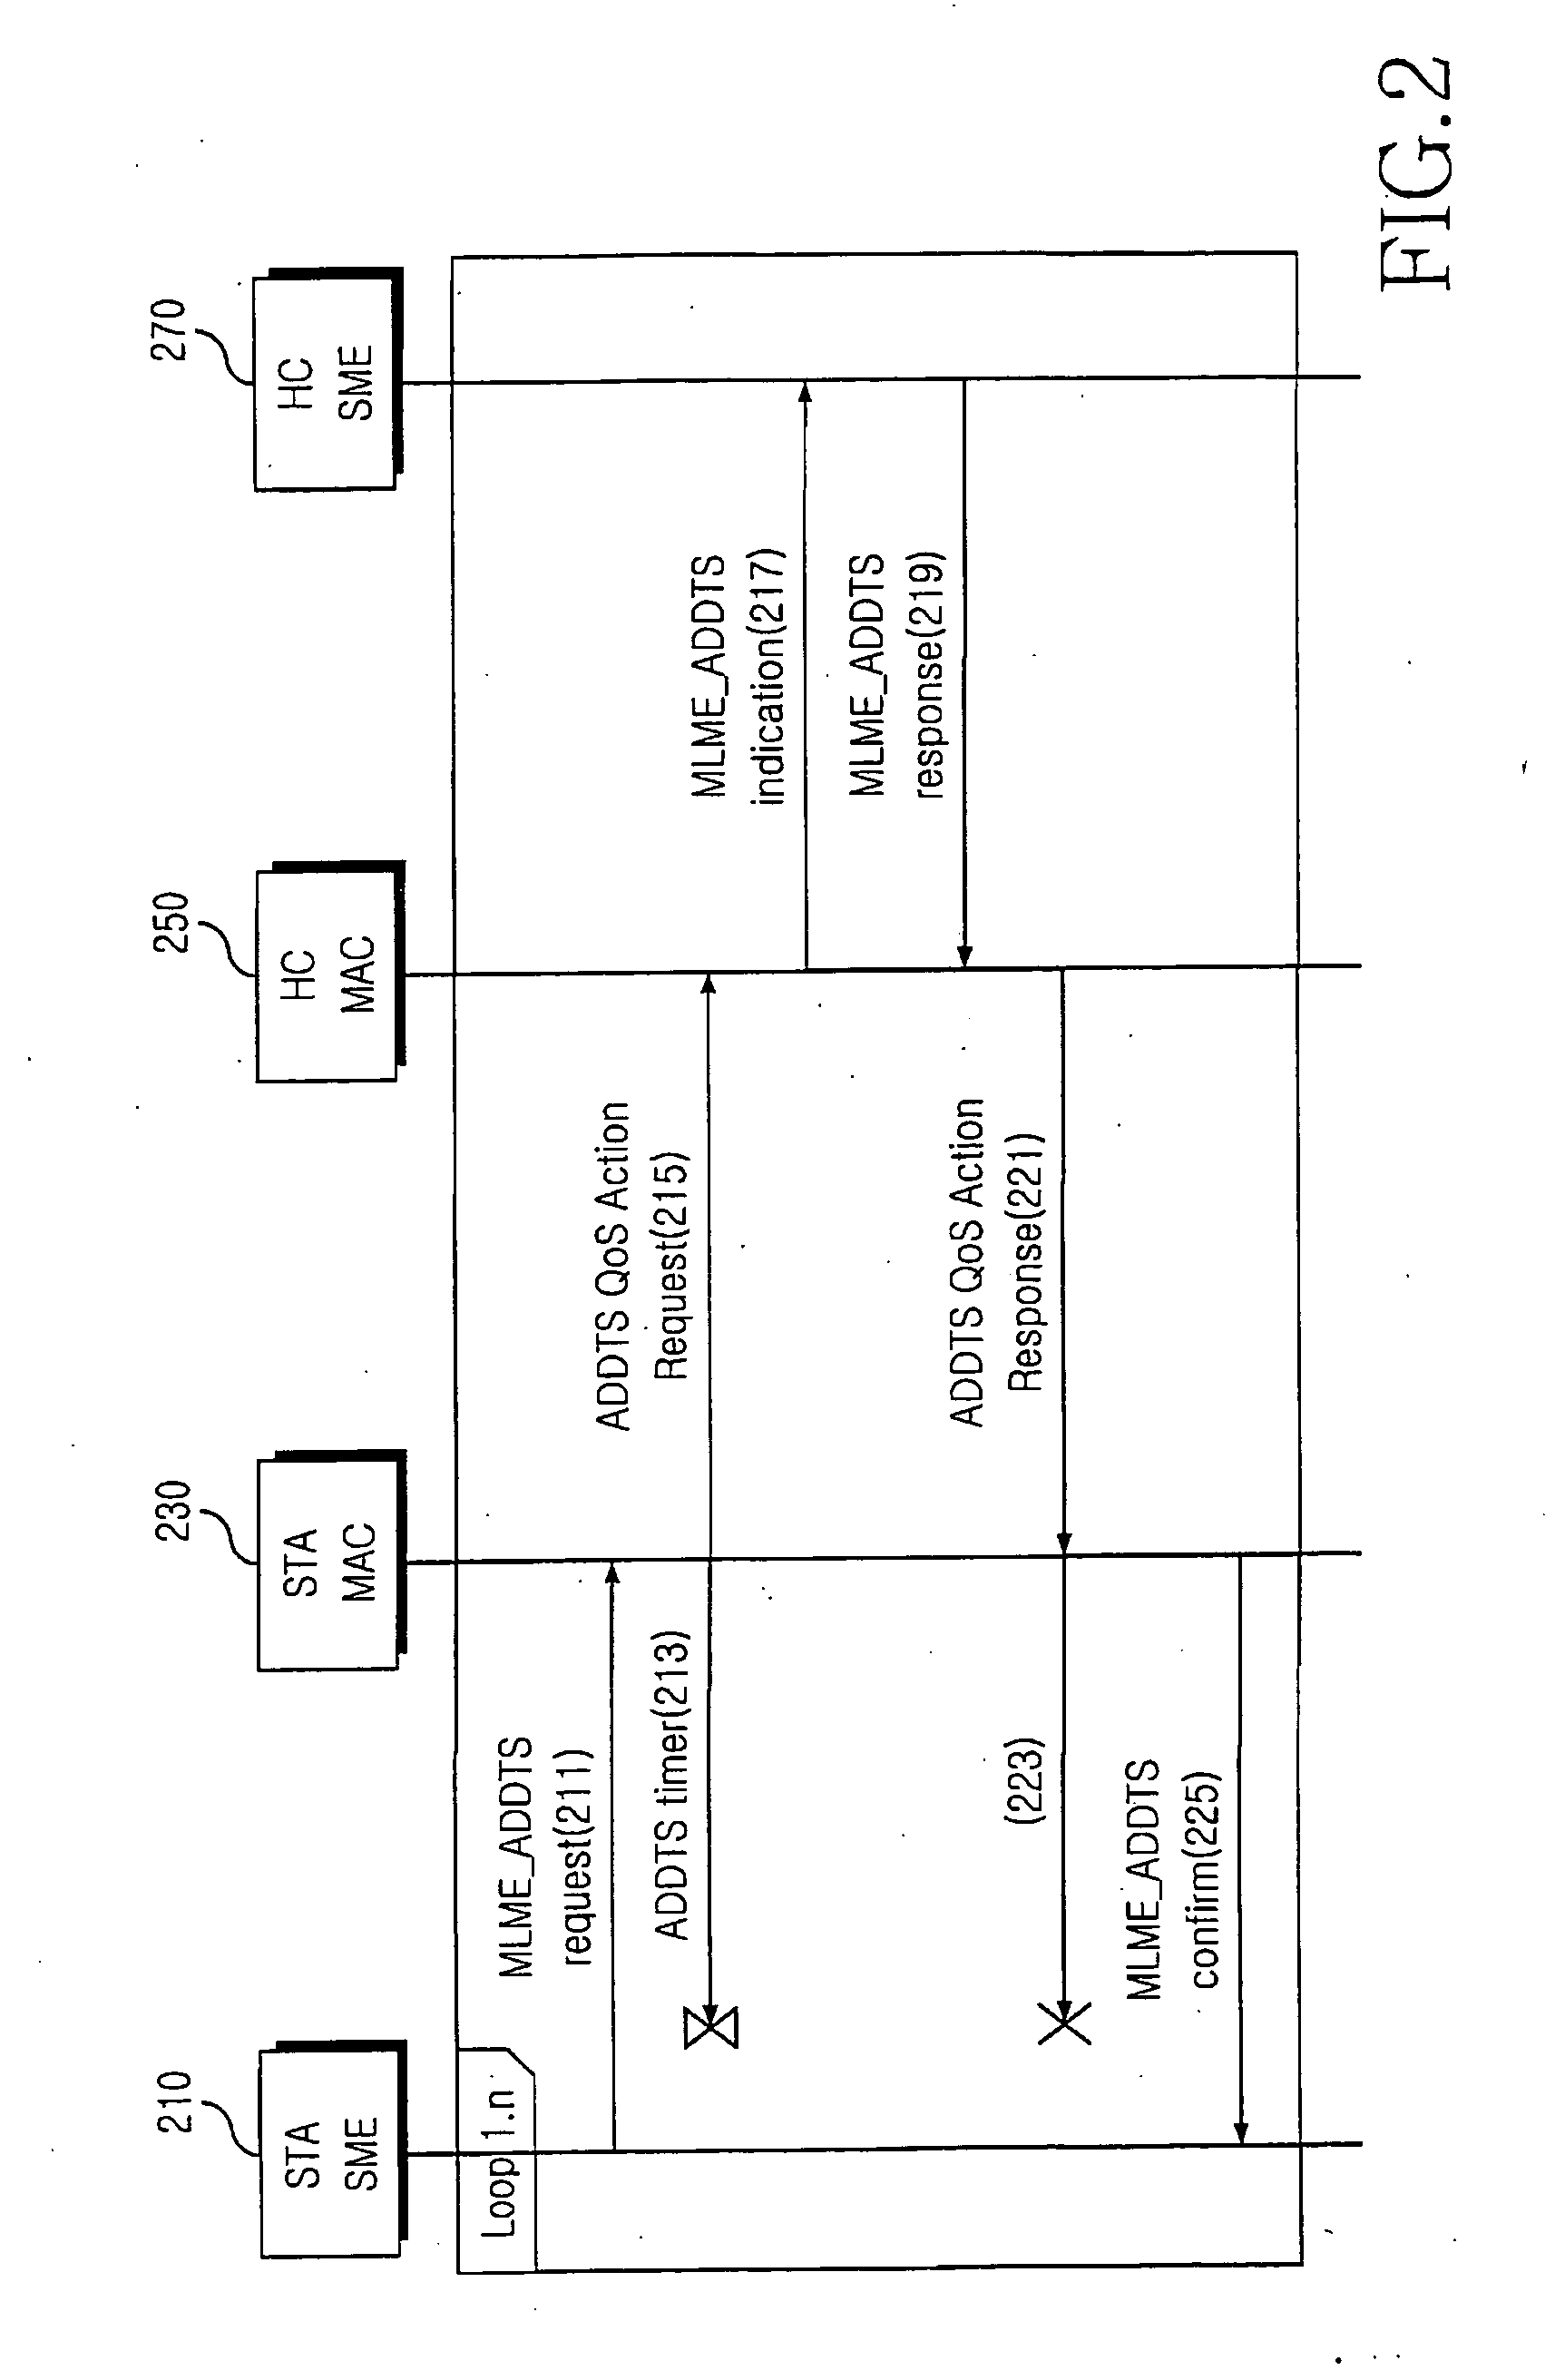 Apparatus and method for processing vertical handoff in a wireless communication system